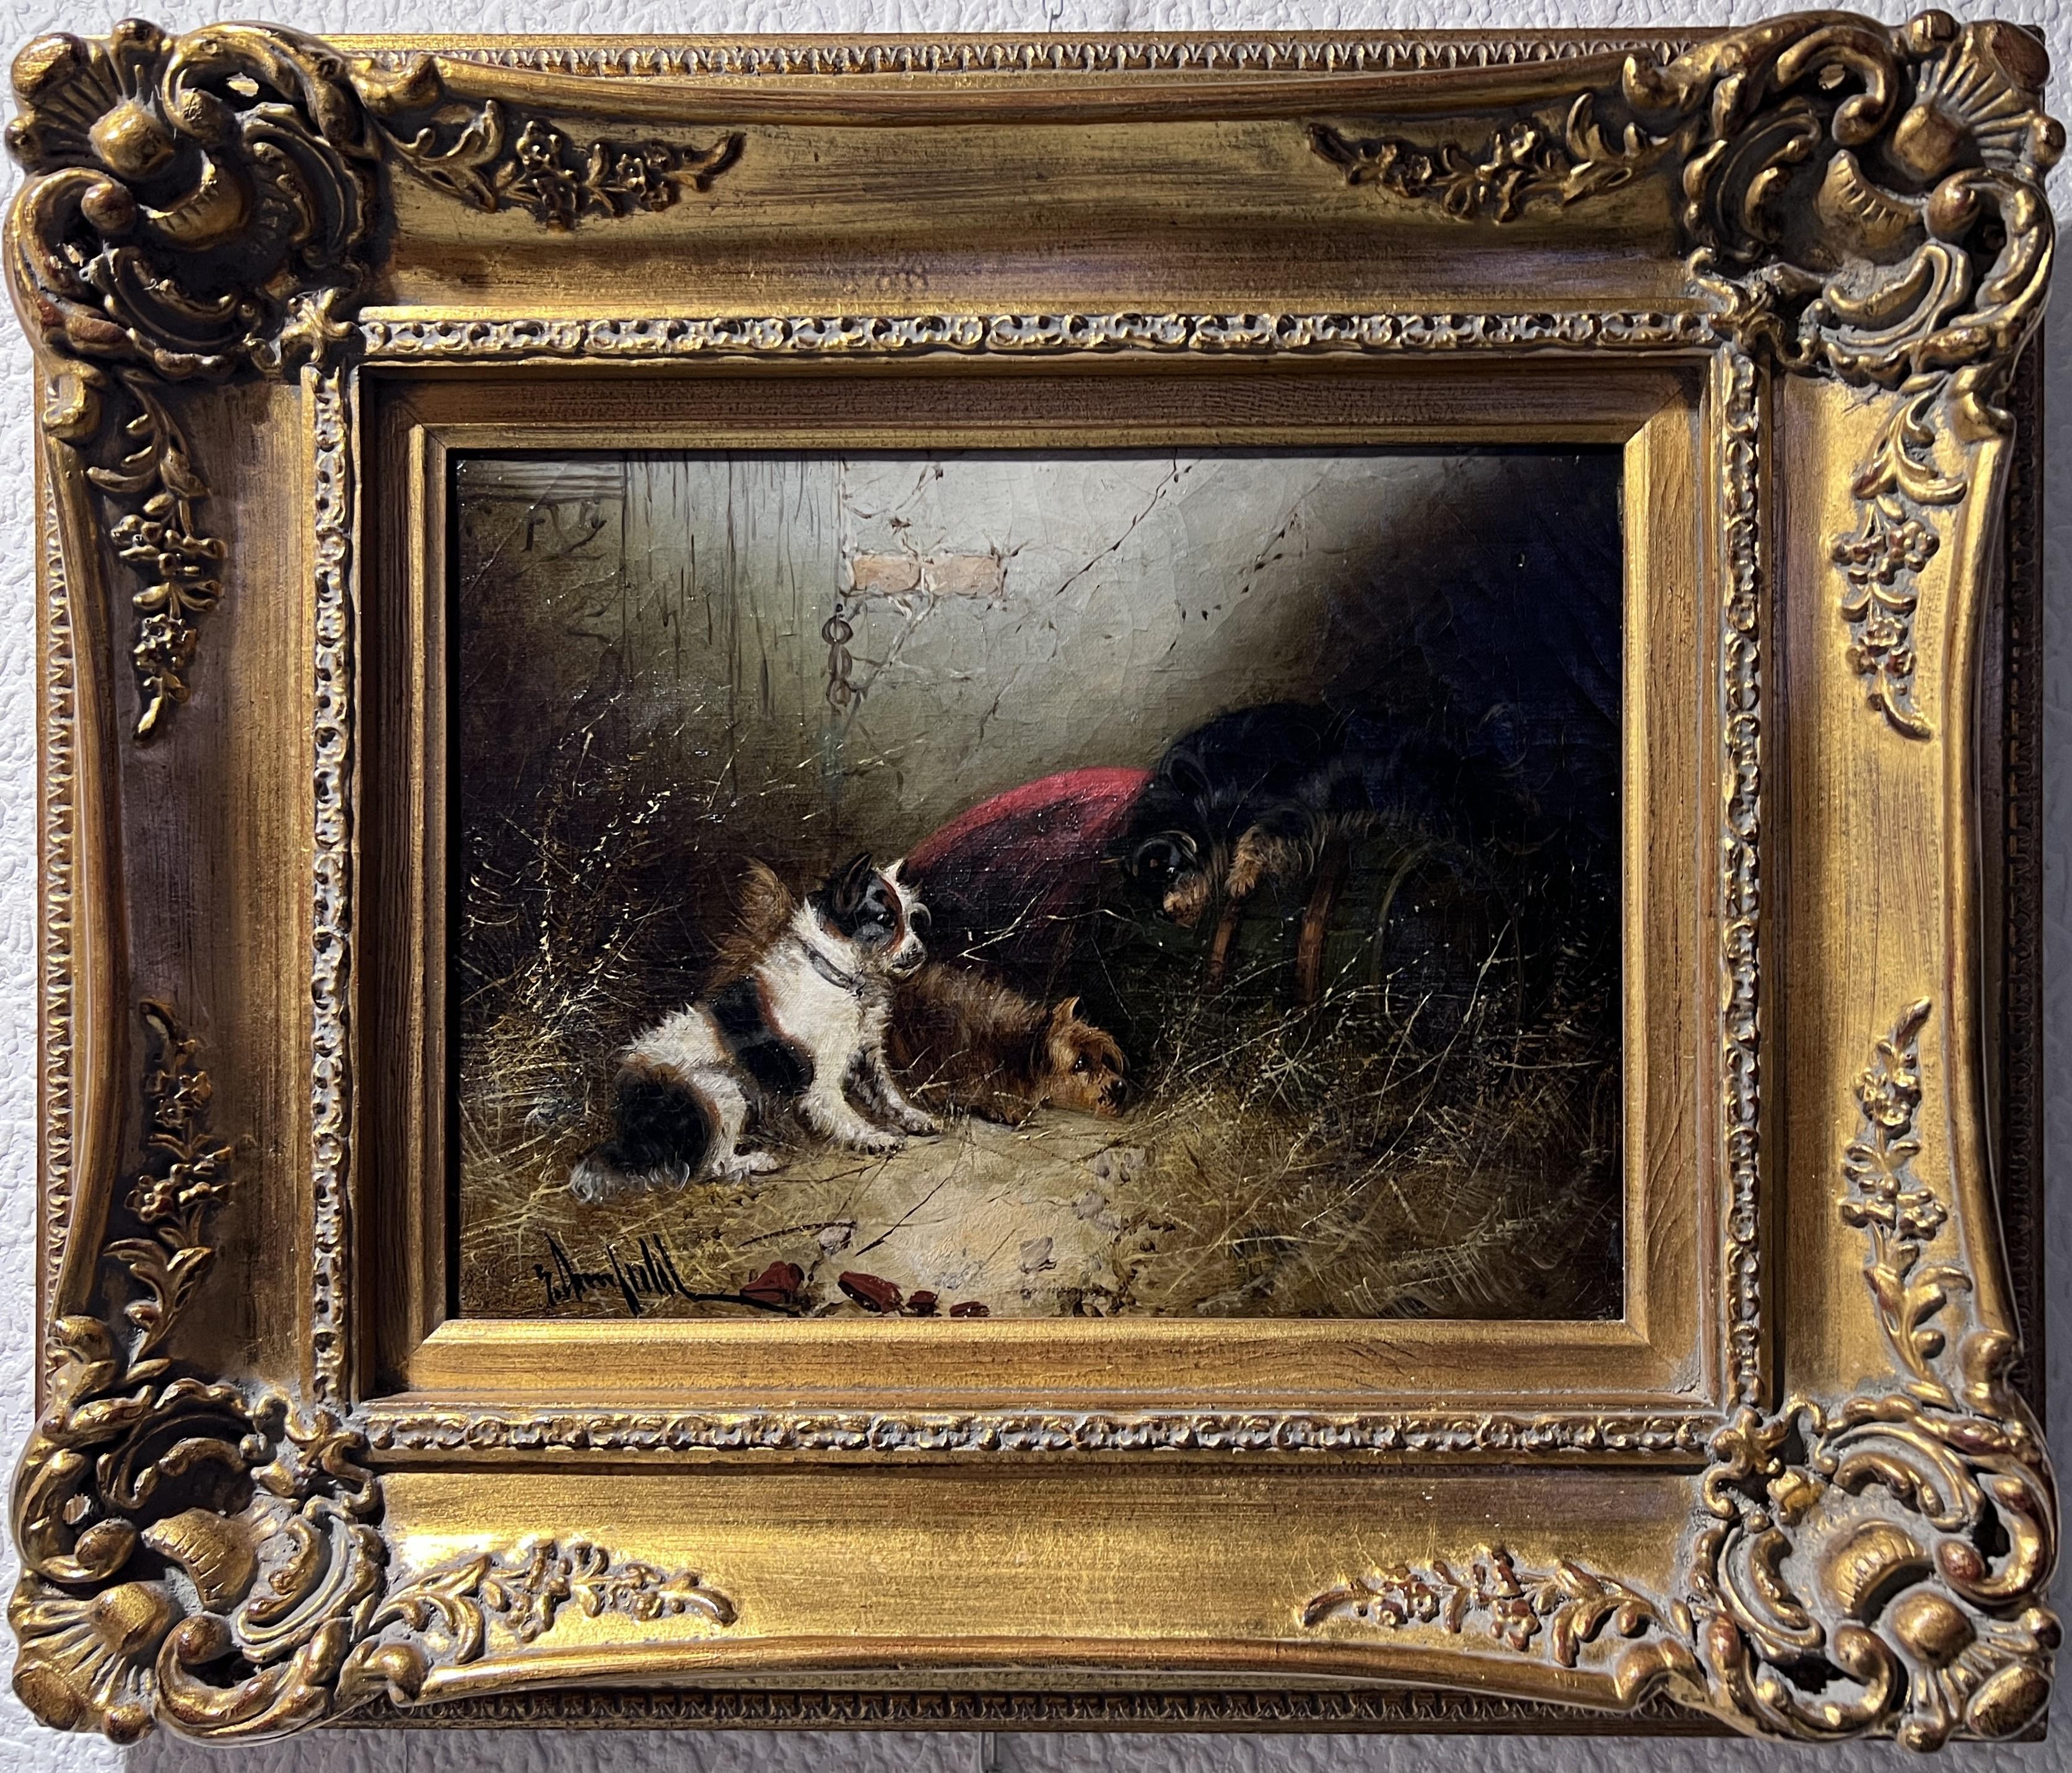 Up for sale is a phenomenal 19th century original oil painting on canvas by Listed British Artist Edward Armfield 1817-1896, depicting a dogs in the manger.
 
Signed in the lower-left corner.

Overall good vintage condition. Signs of age and wear.